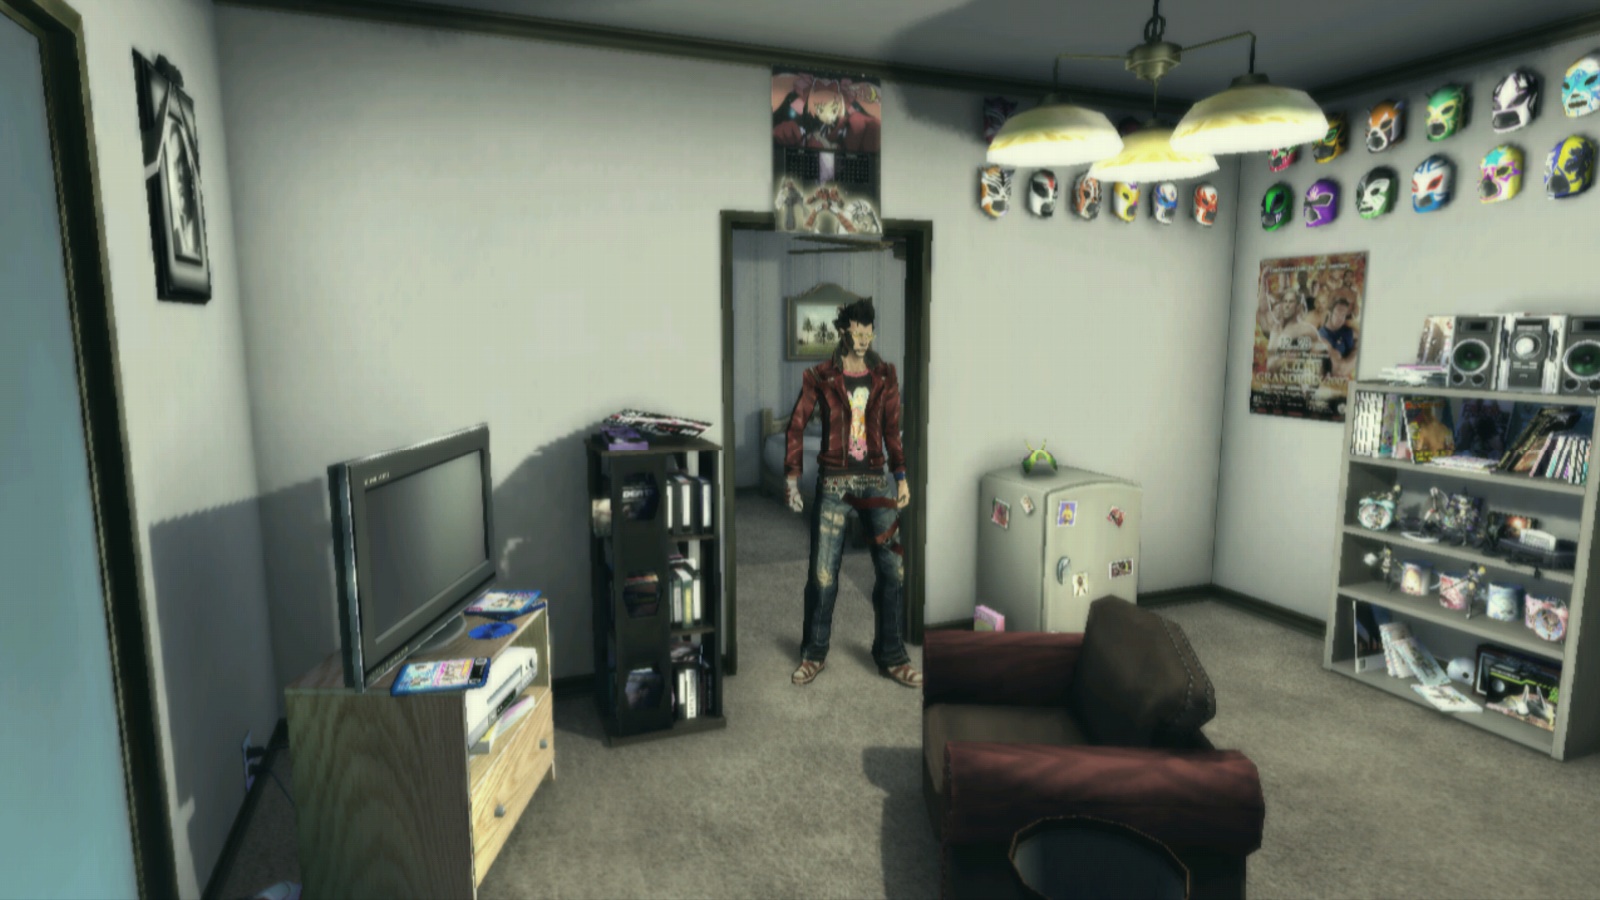 Travis standing in the doorway of what appears to be a studio apartment. There's a beat up chair, two sets of shelves, a small tv, a mini fridge covered in stickers, and luchador masks hanging on the wall.